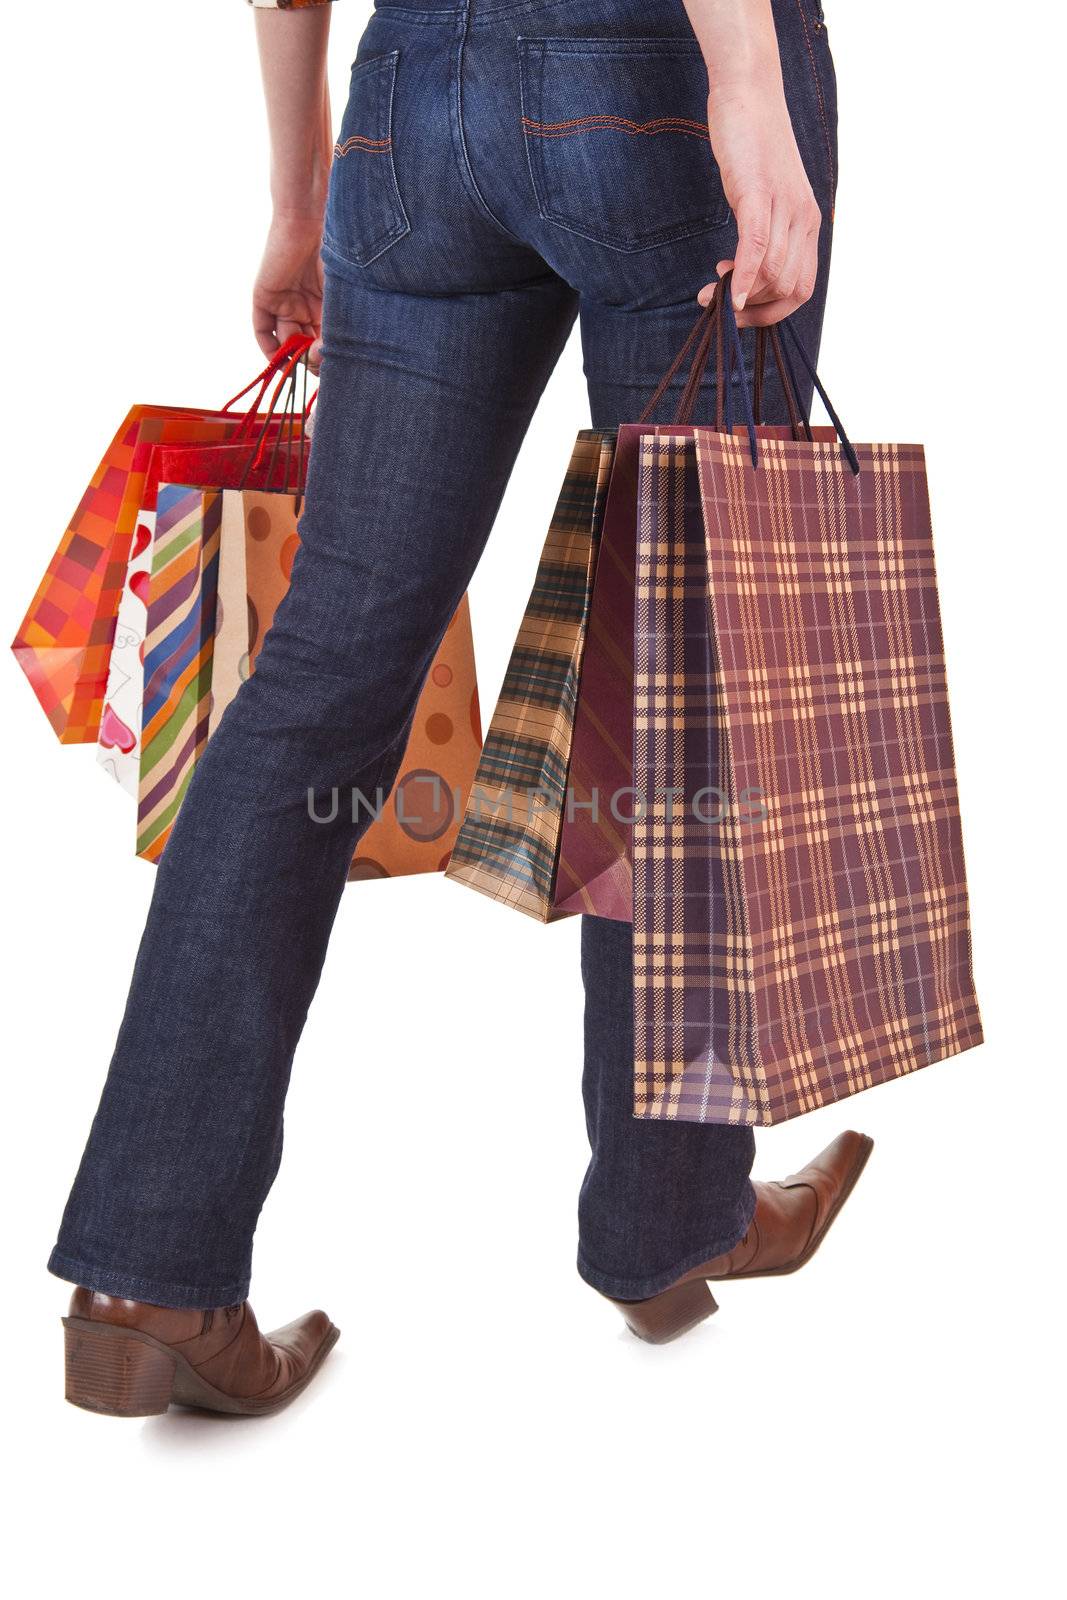 Happy woman holding shopping bags by adamr